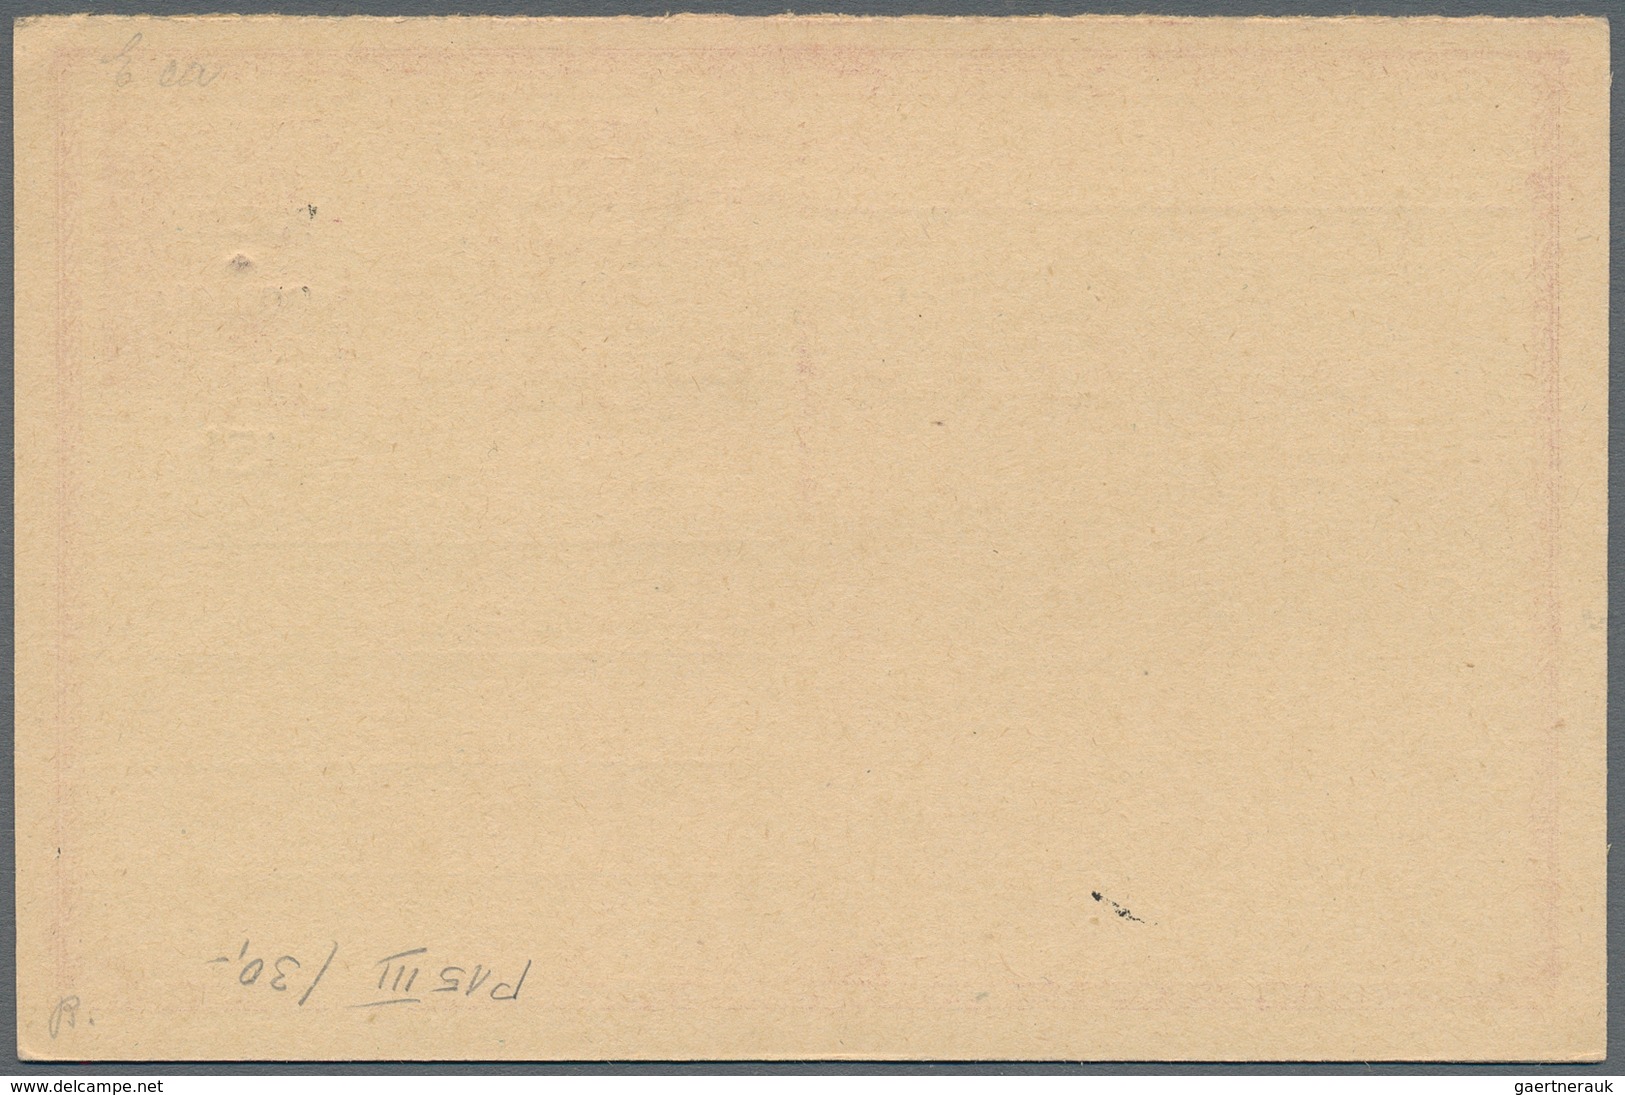 Polen - Ganzsachen: 1919 Unused And Revalued Postal Stationery Card, Original Card From Austria P 23 - Stamped Stationery